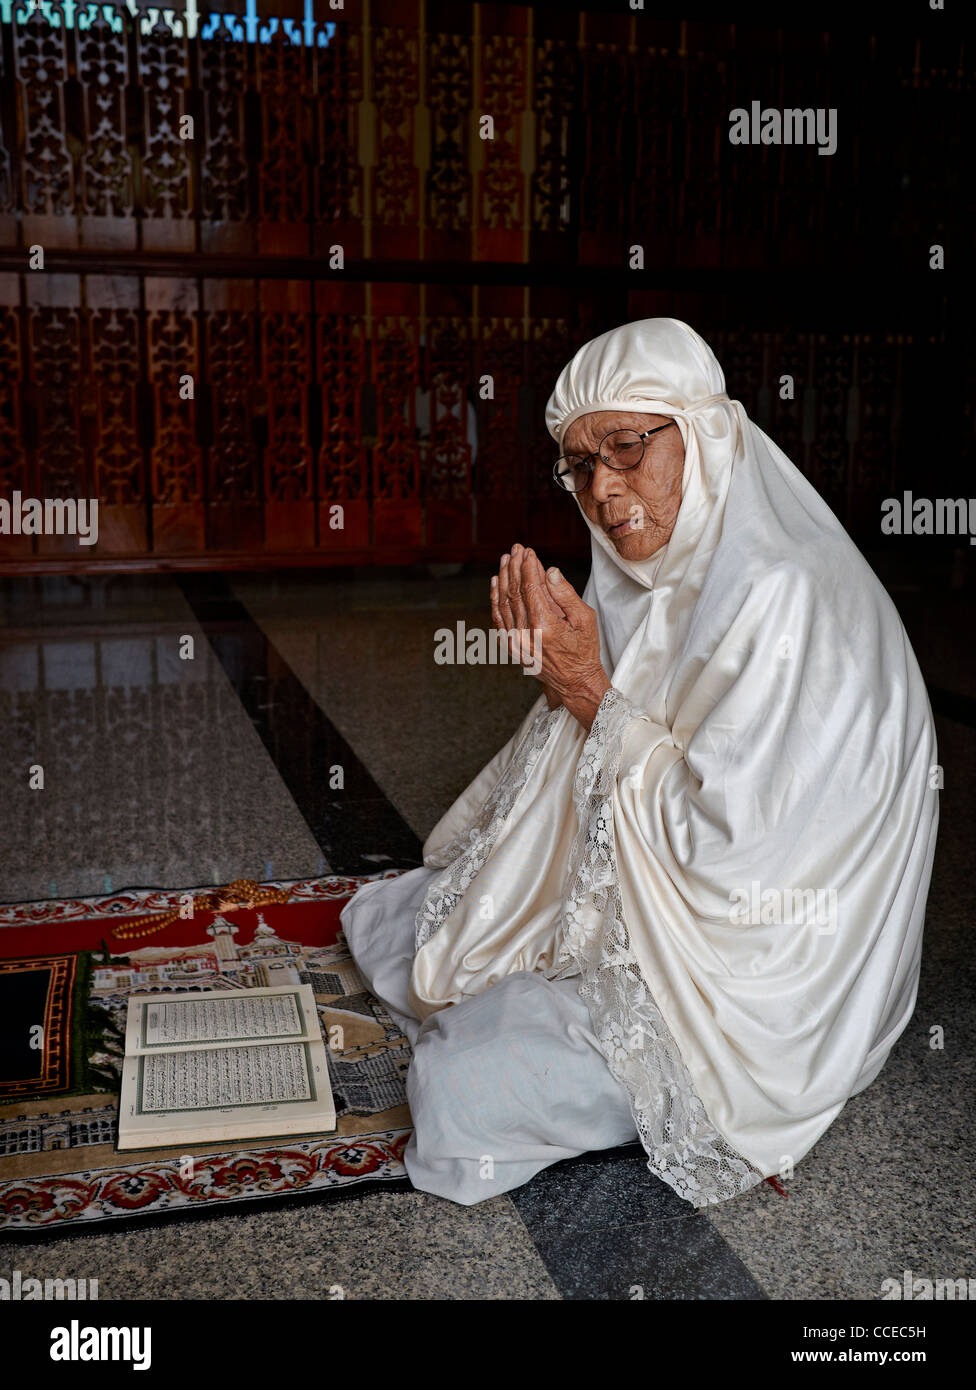 90 year old Muslim woman praying and wearing a white traditional burka Stock Photo